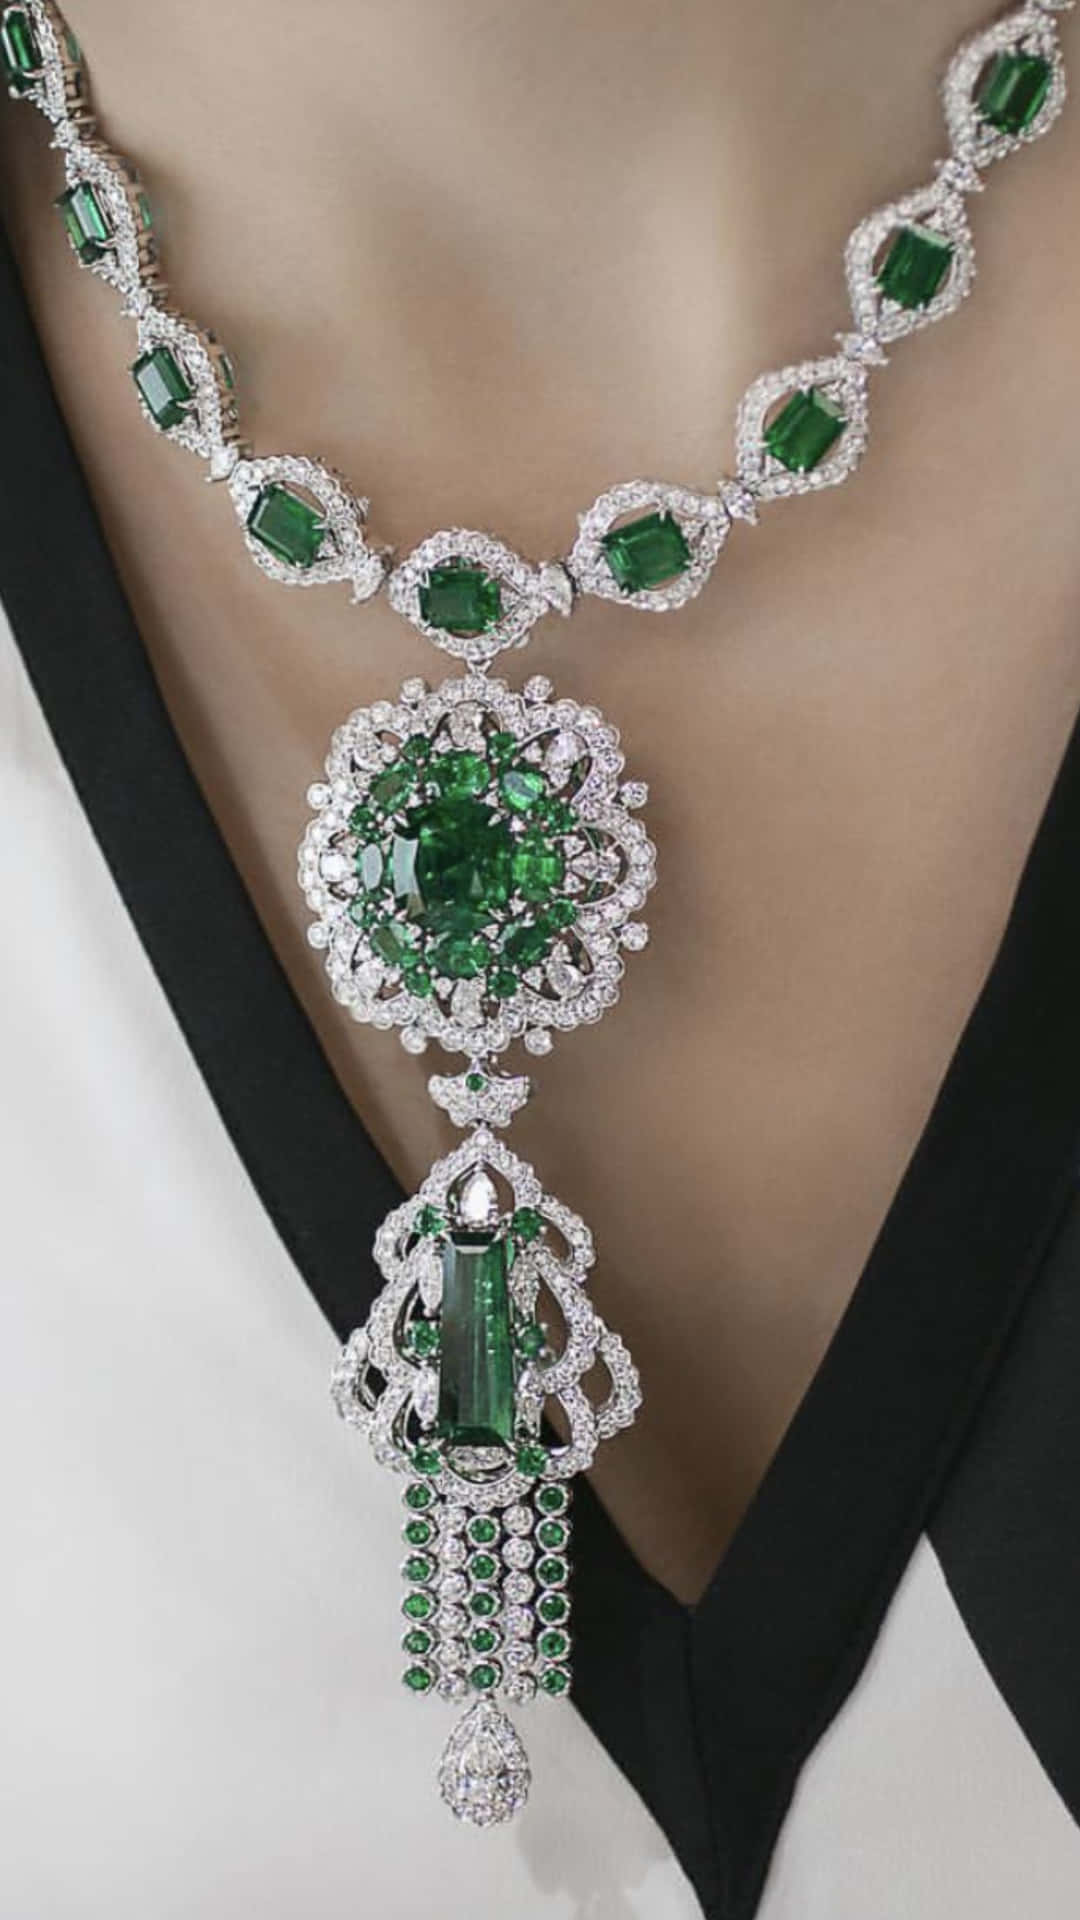 A Woman Wearing A Necklace With Emeralds And Diamonds